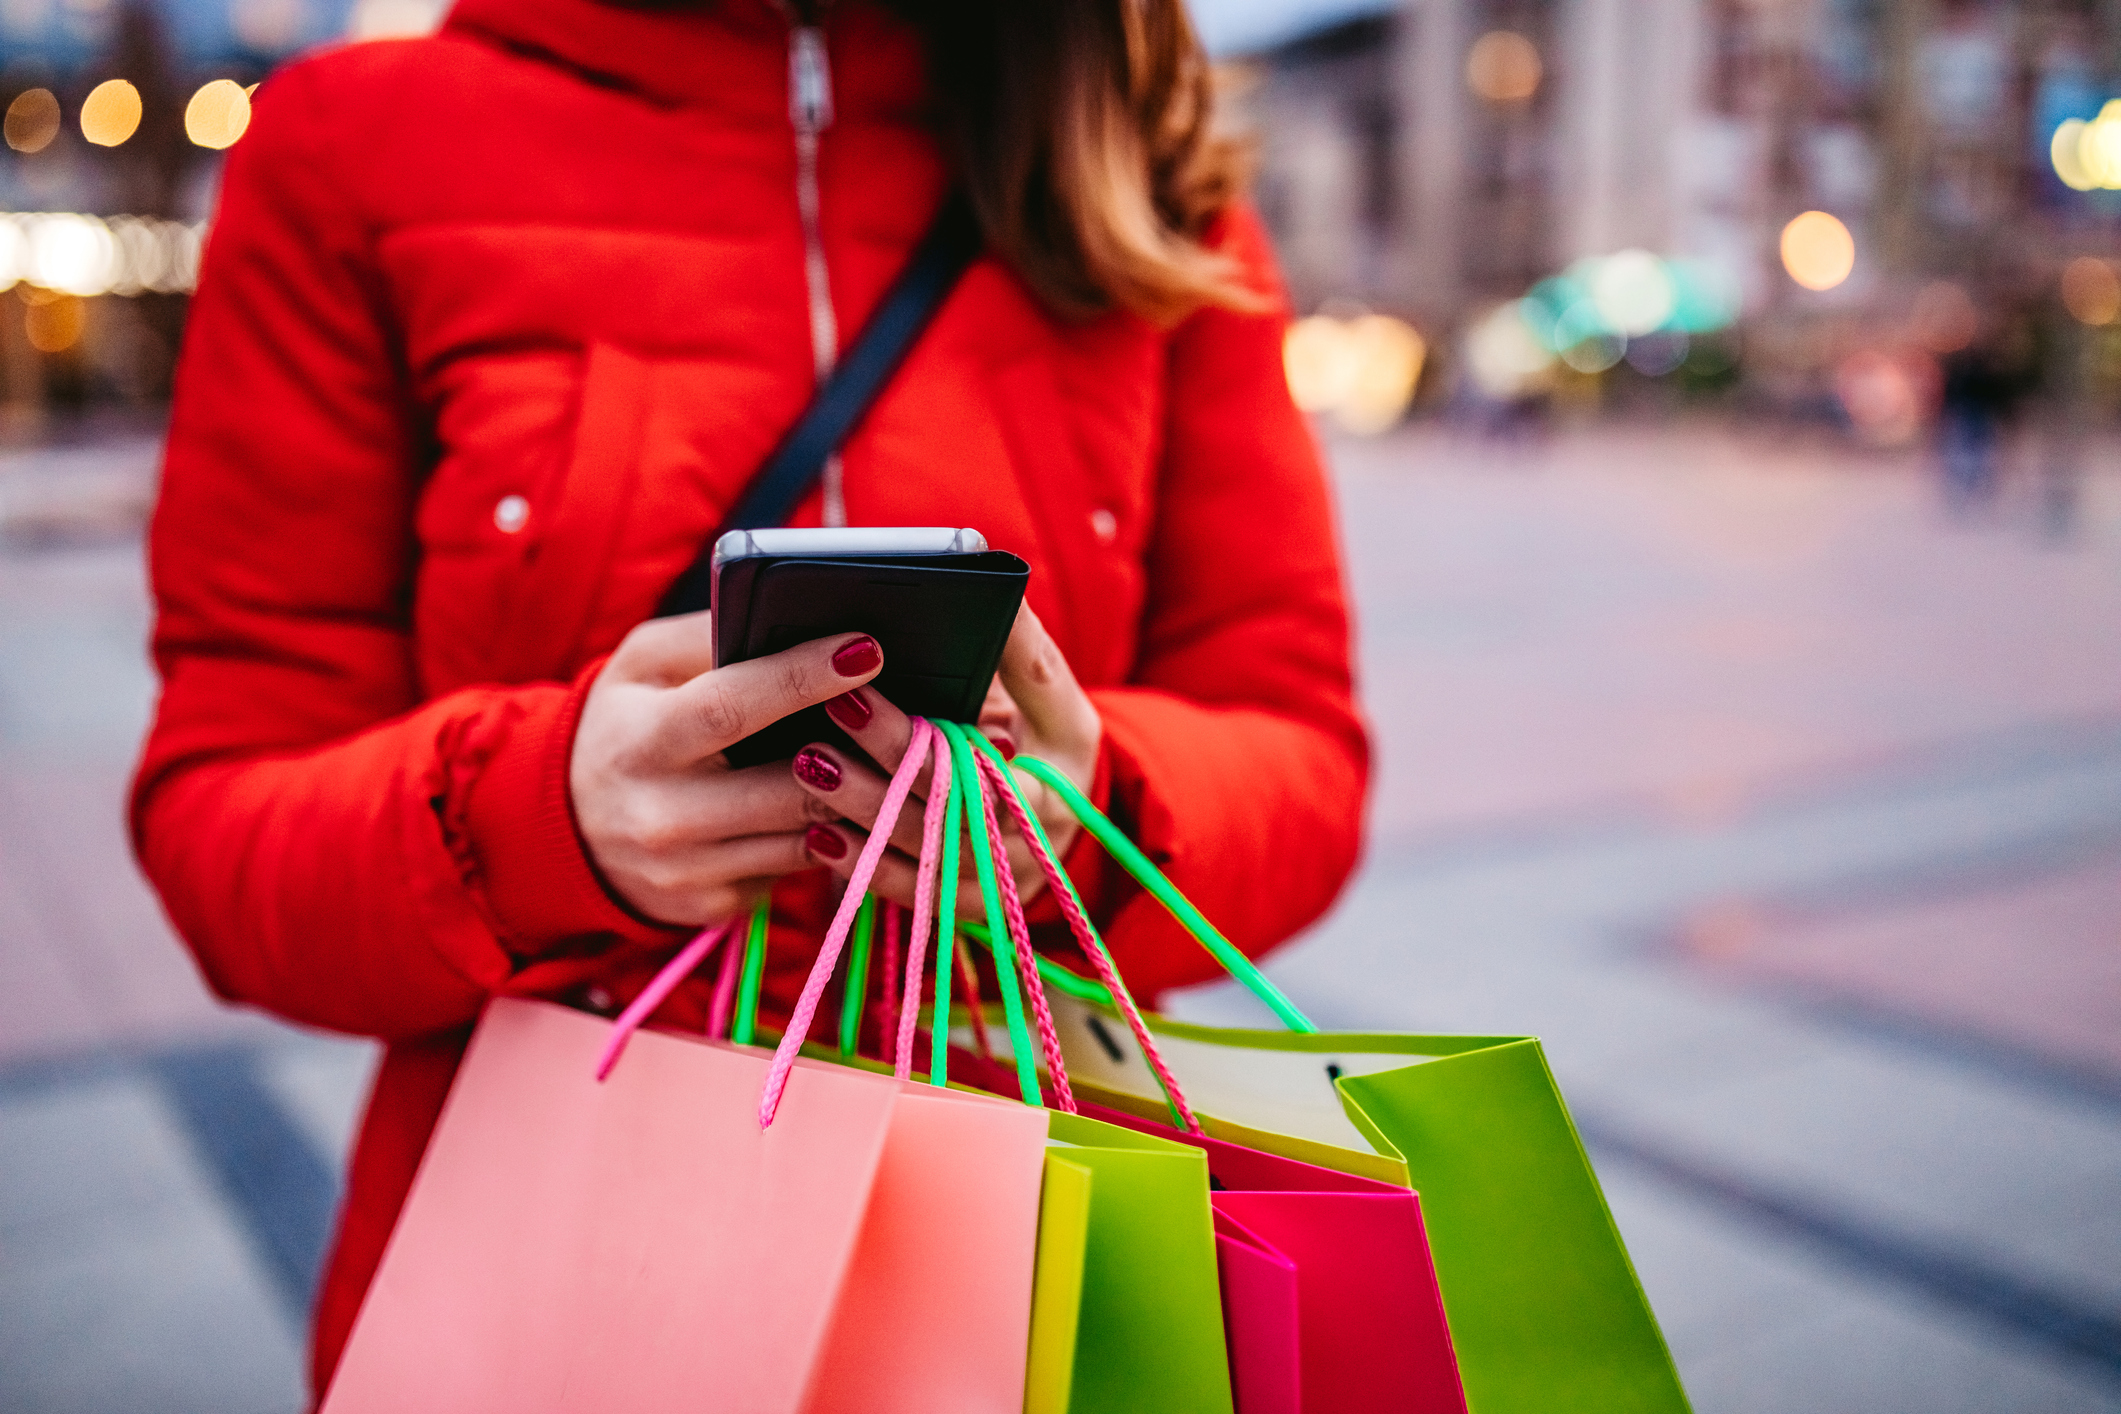 Woman with shopping bags using phone